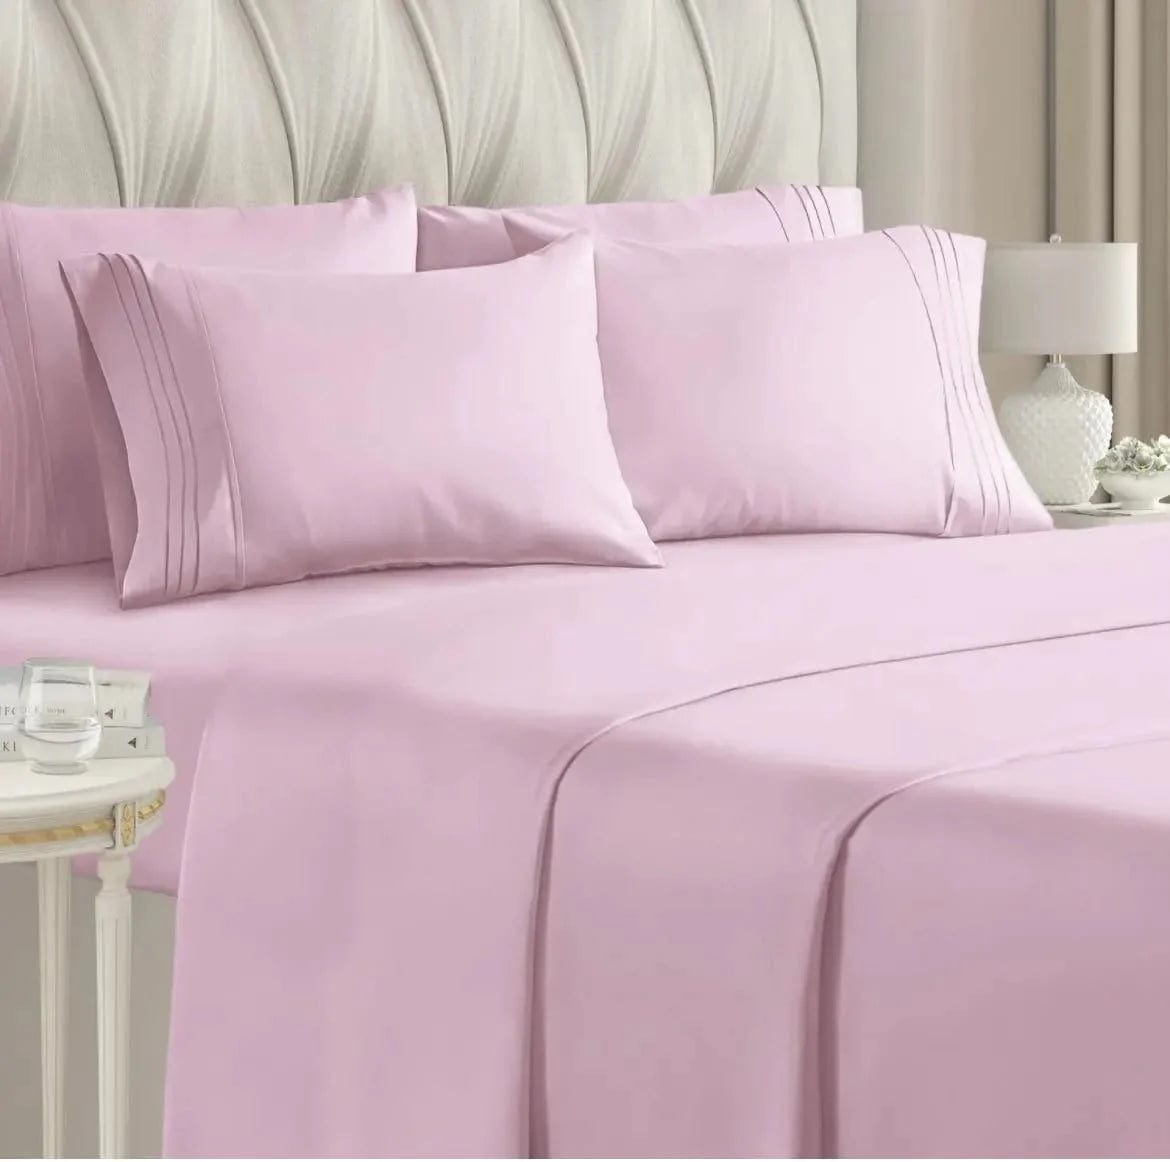 Linen World Bed Sheets Pink / King “Winston” 800 Collection 6 pc Deep Pocket Sheet Set in All Sizes